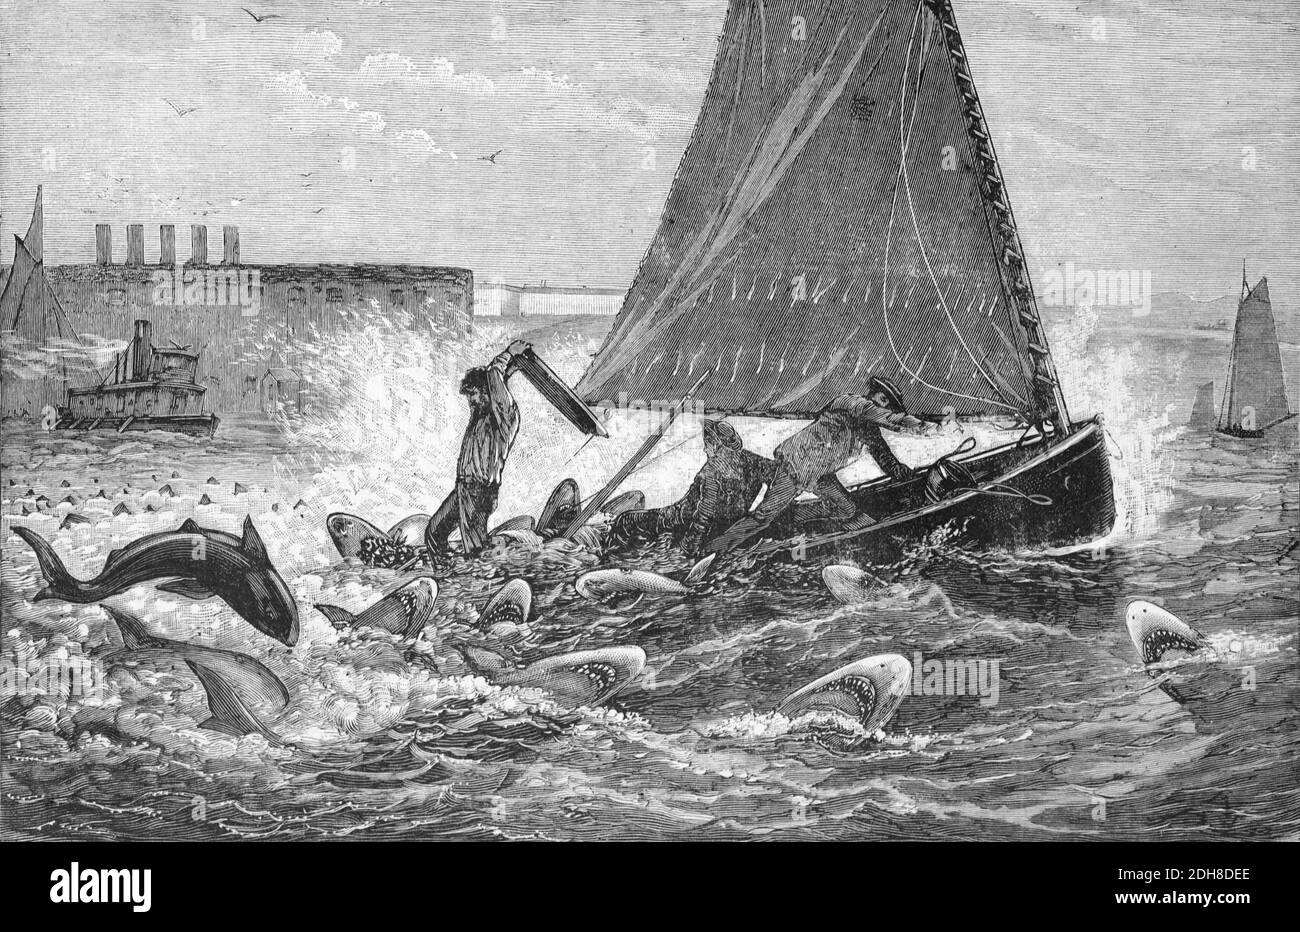 Sailors & Sailing Boat Attacked by Herd, Frenzy, School or Shiver of Sharks (Engr 1880) Vintage Illustration or Engraving Stock Photo